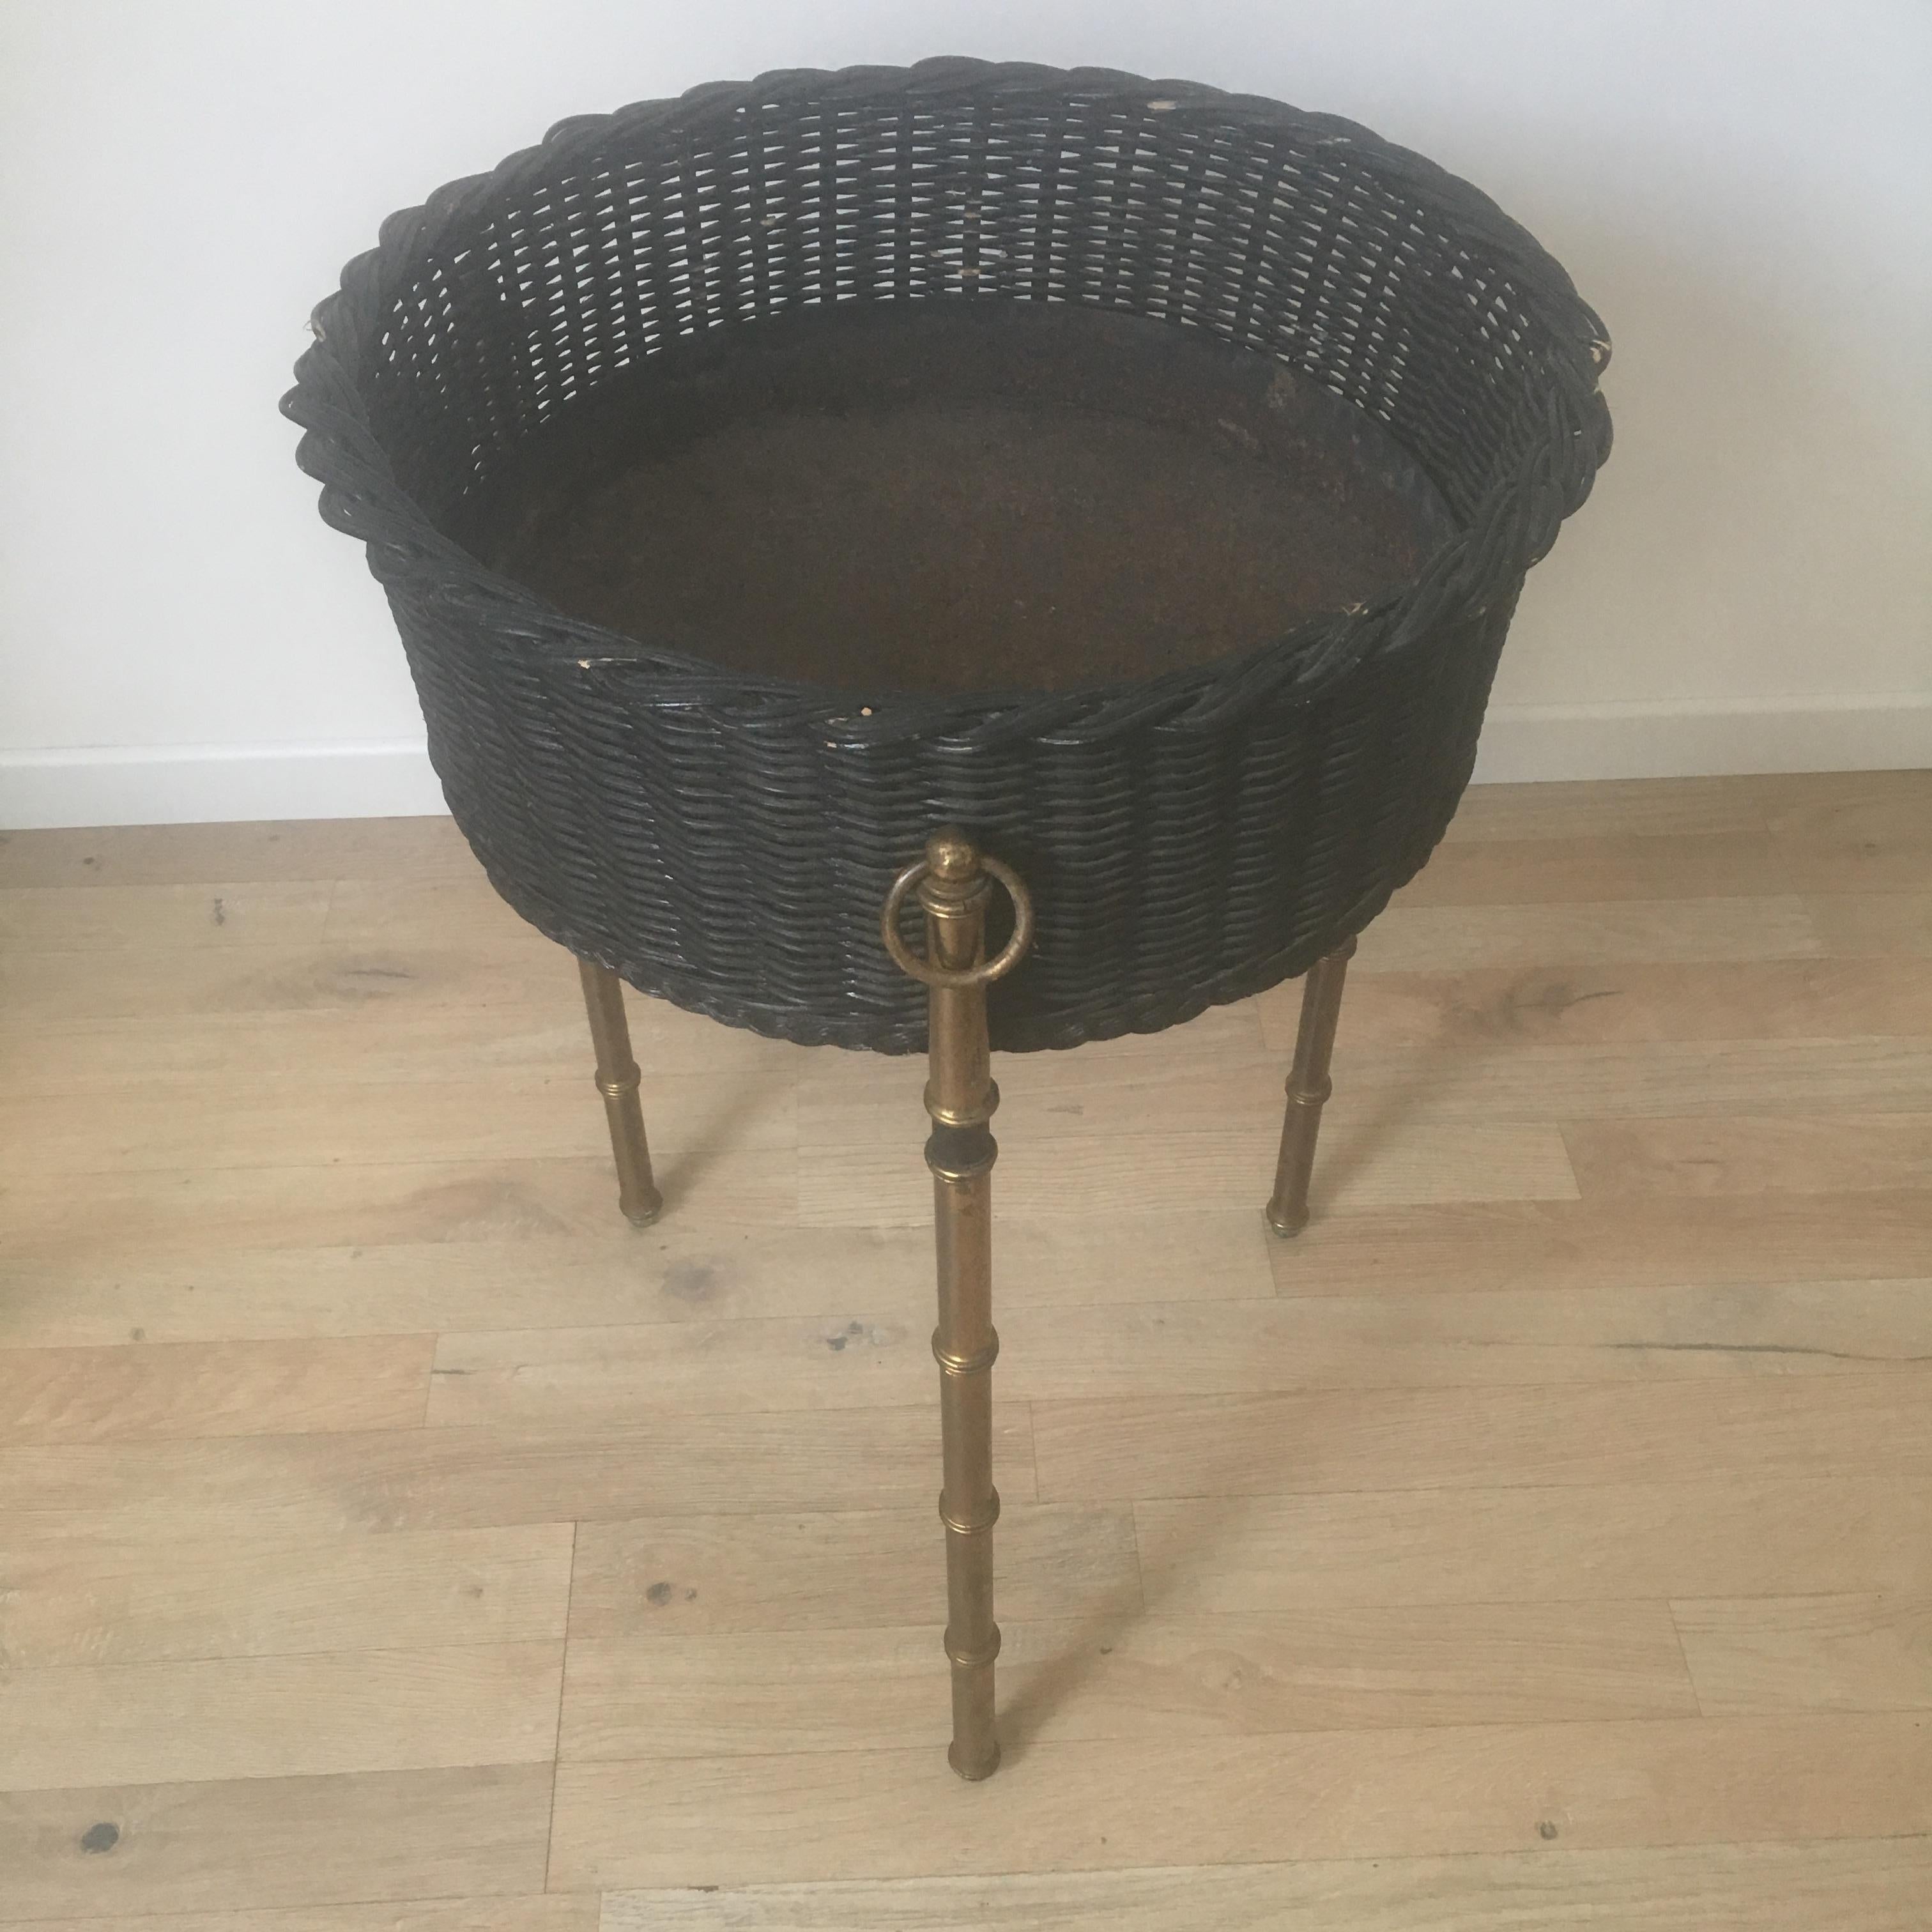 A pair of large black rattan indoor planters designed by Jacques Adnet in France in 1950s.
A round basket in black rattan rests on a tripod base in gilt brass bamboo style. Brass rings and stitched black leather bands are characteristic of the